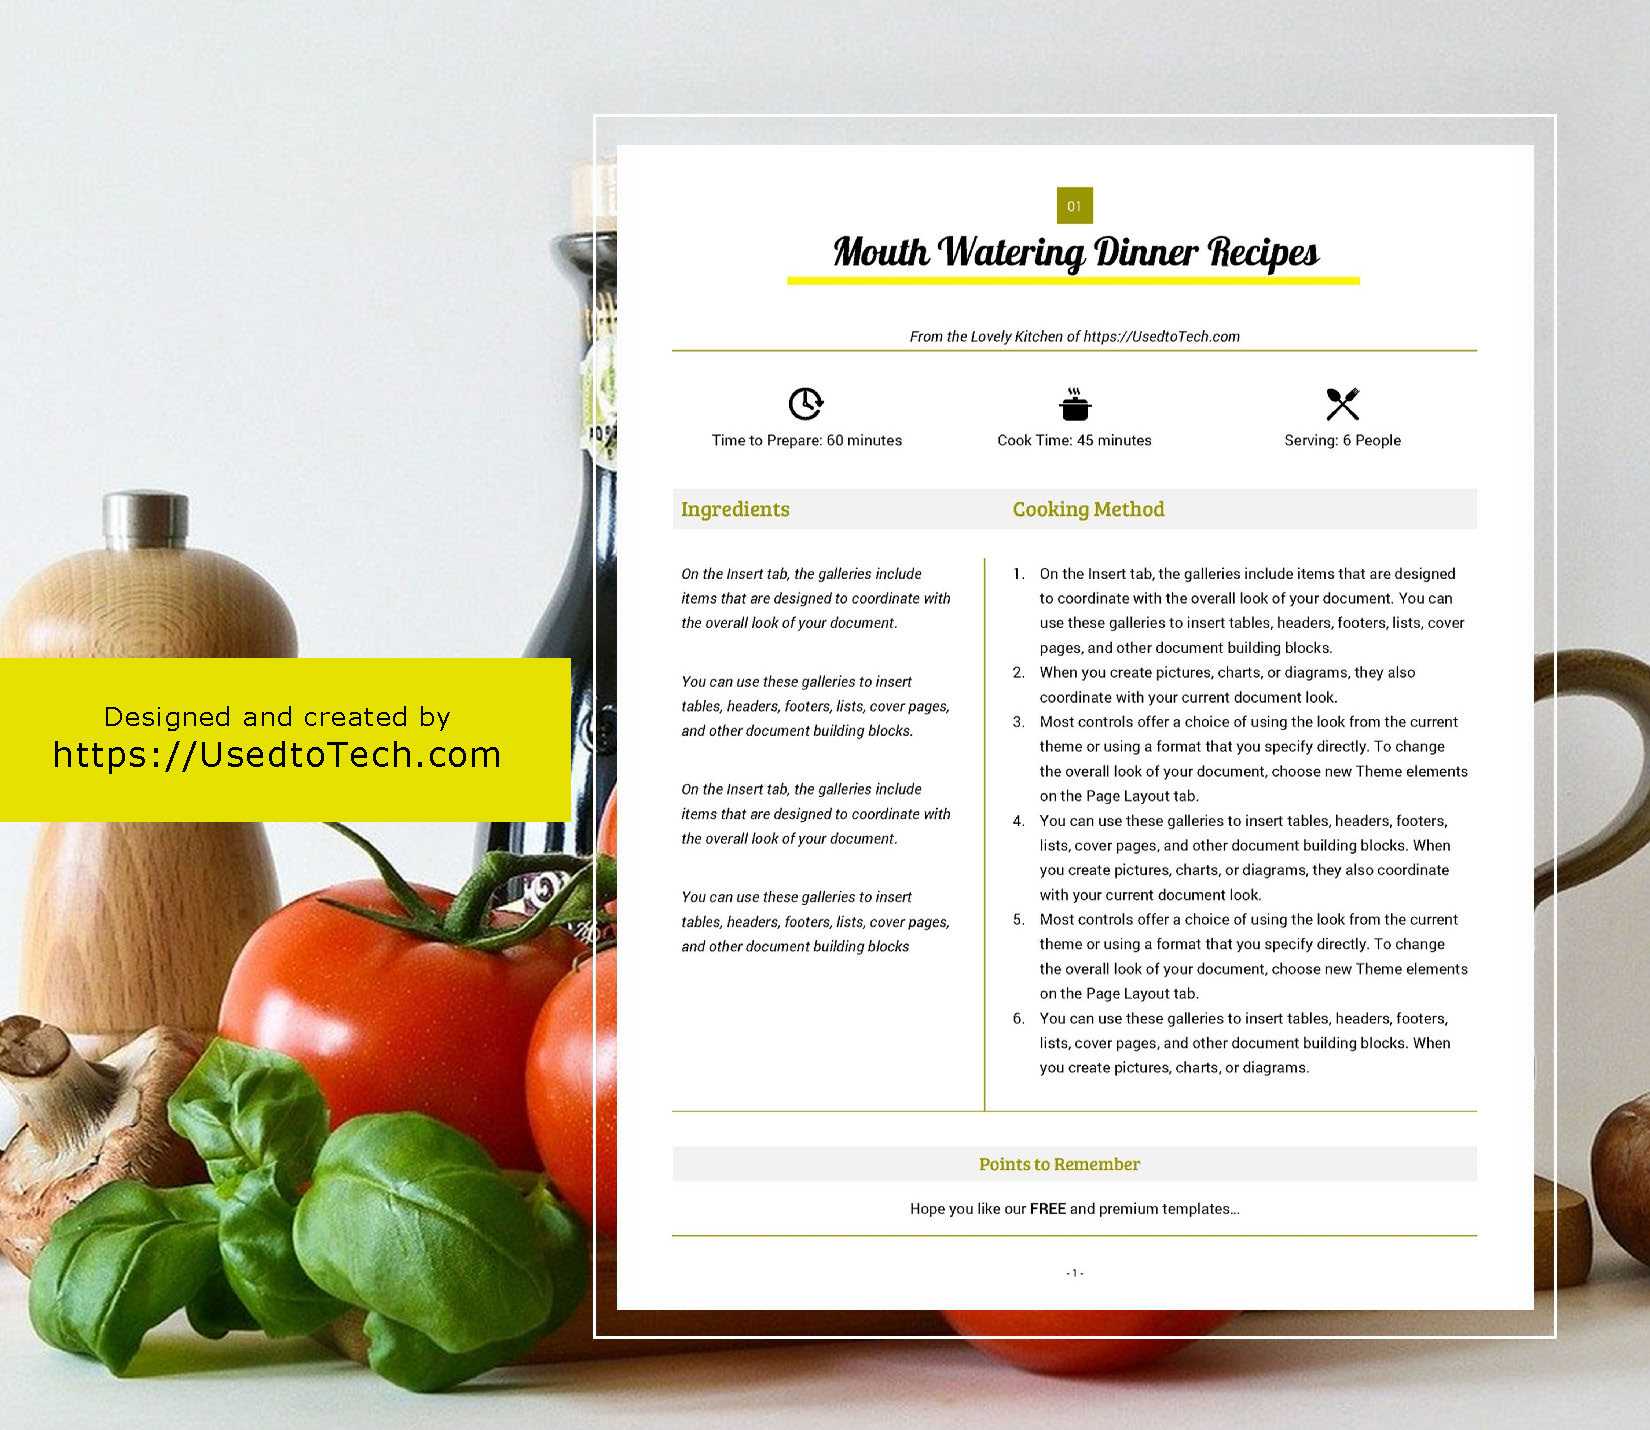 Best Looking Full Page Recipe Card In Microsoft Word – Used In Microsoft Word Recipe Card Template